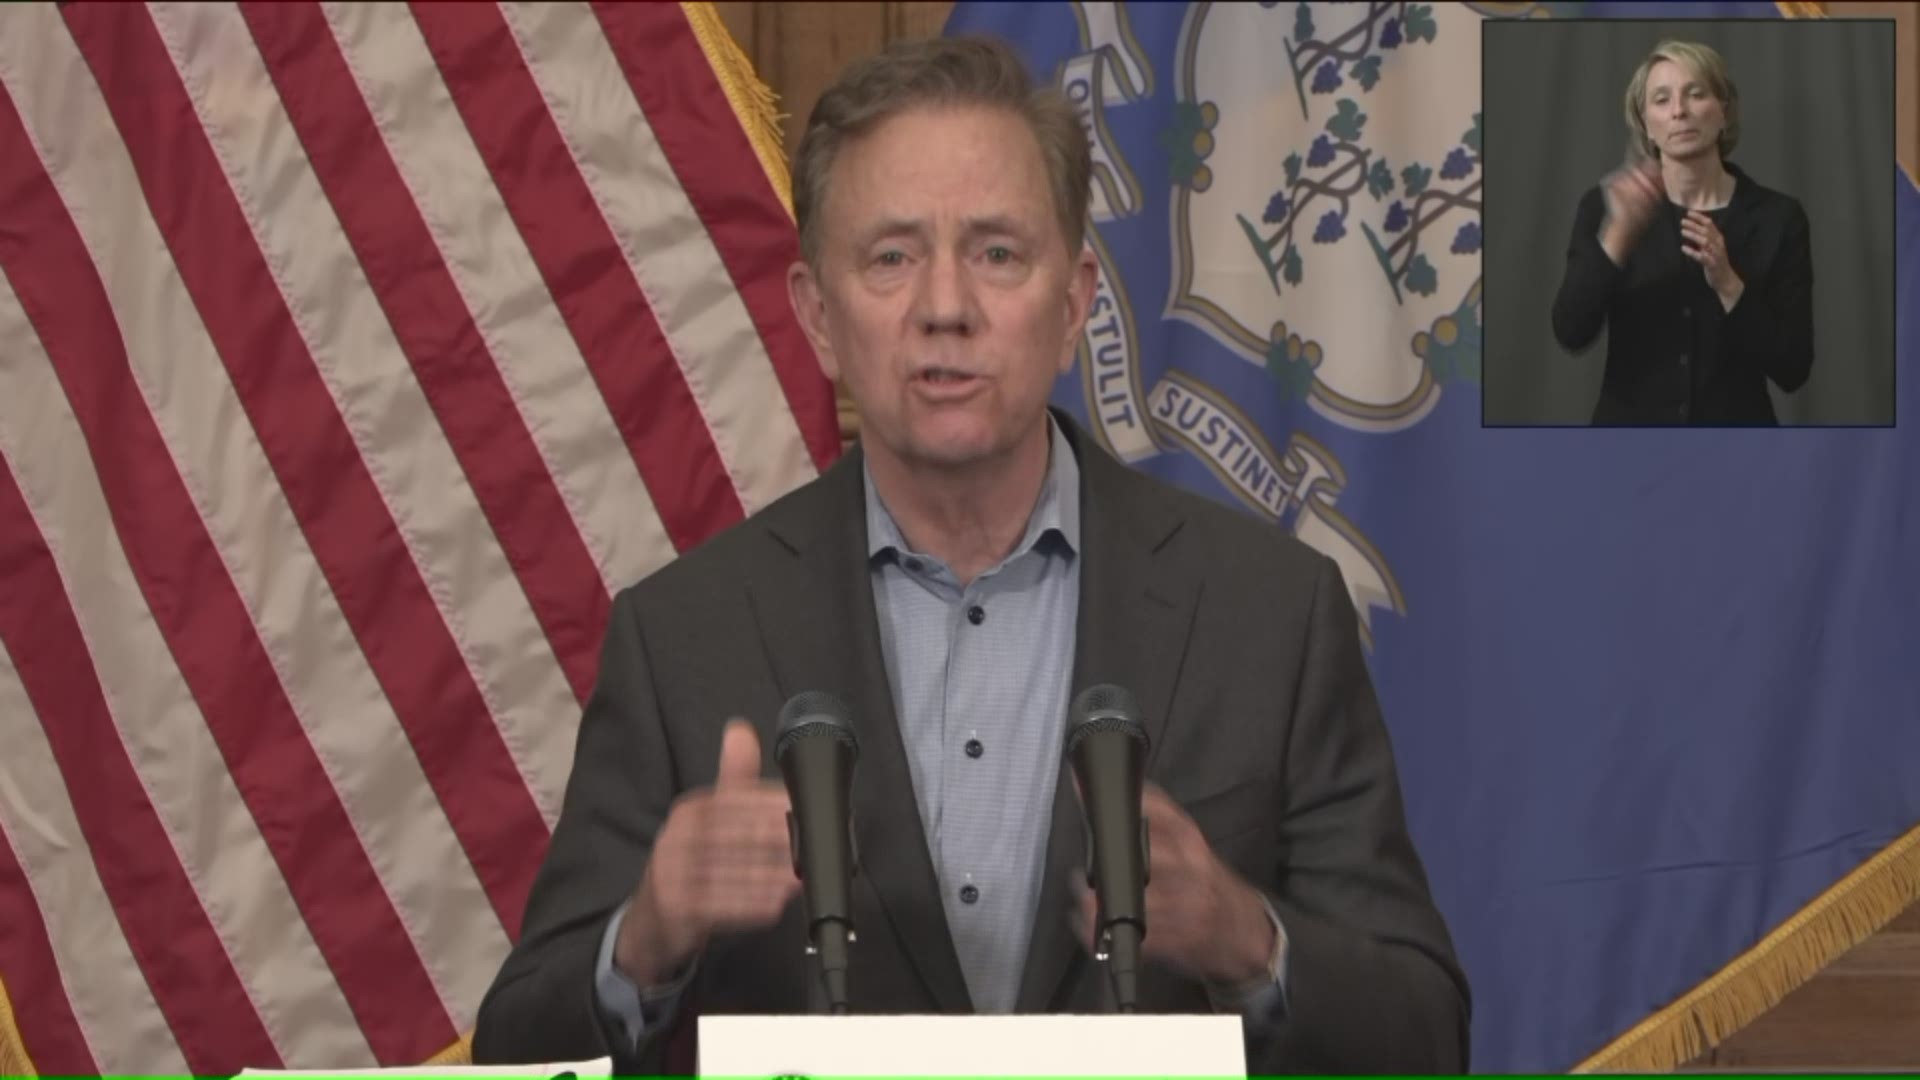 "I feel in real time what these decisions mean and how the impact families." Gov. Lamont addressed concerns of CT residents with plans for the summer amid COVID-19.